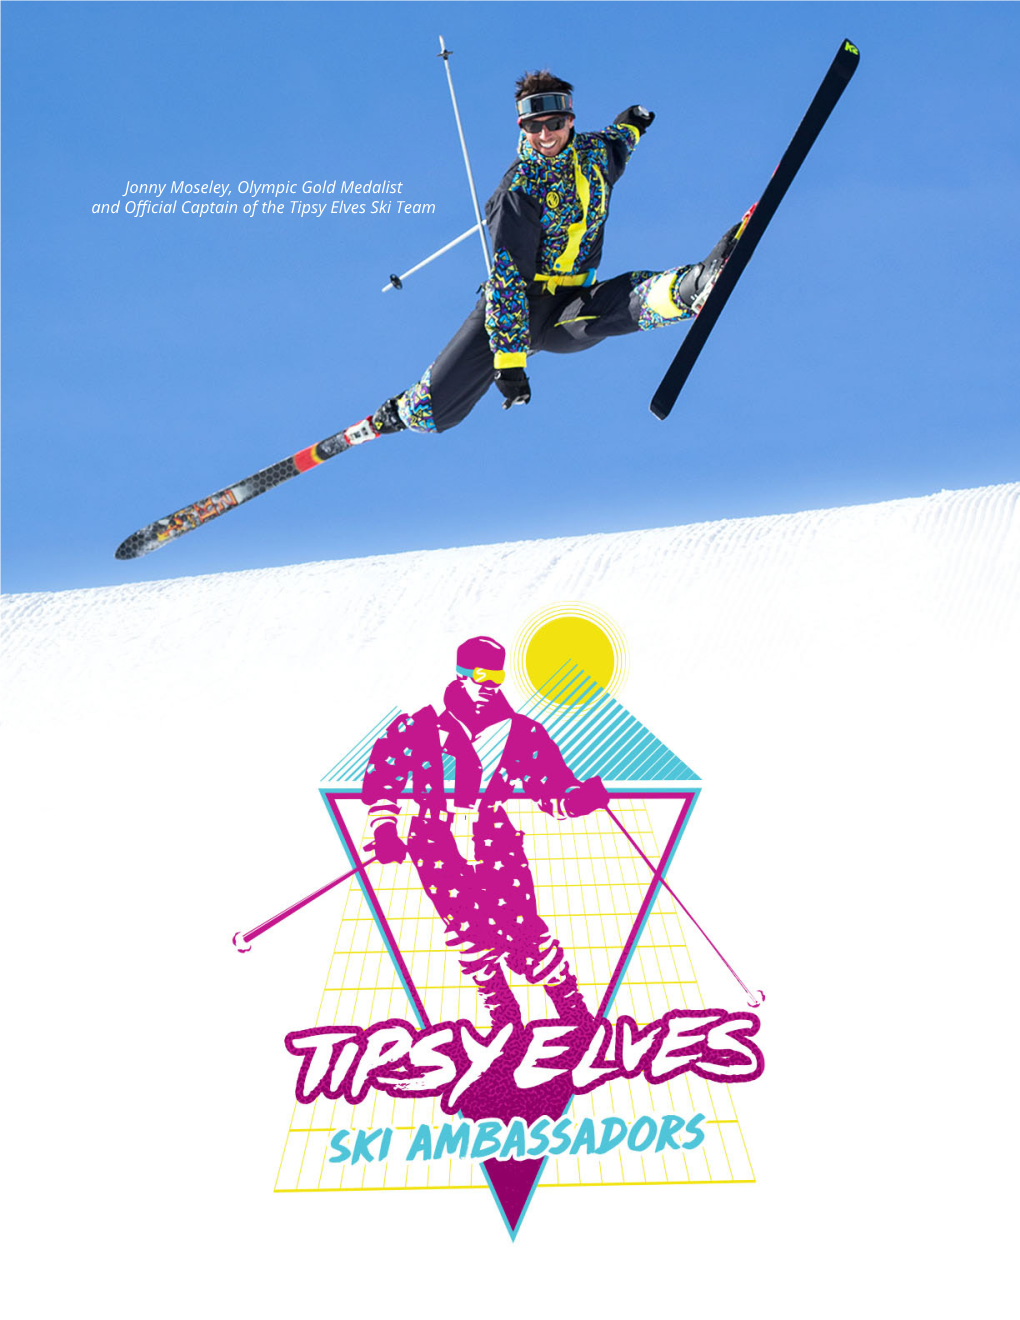 Jonny Moseley, Olympic Gold Medalist and Official Captain of the Tipsy Elves Ski Team I’M Intrigued